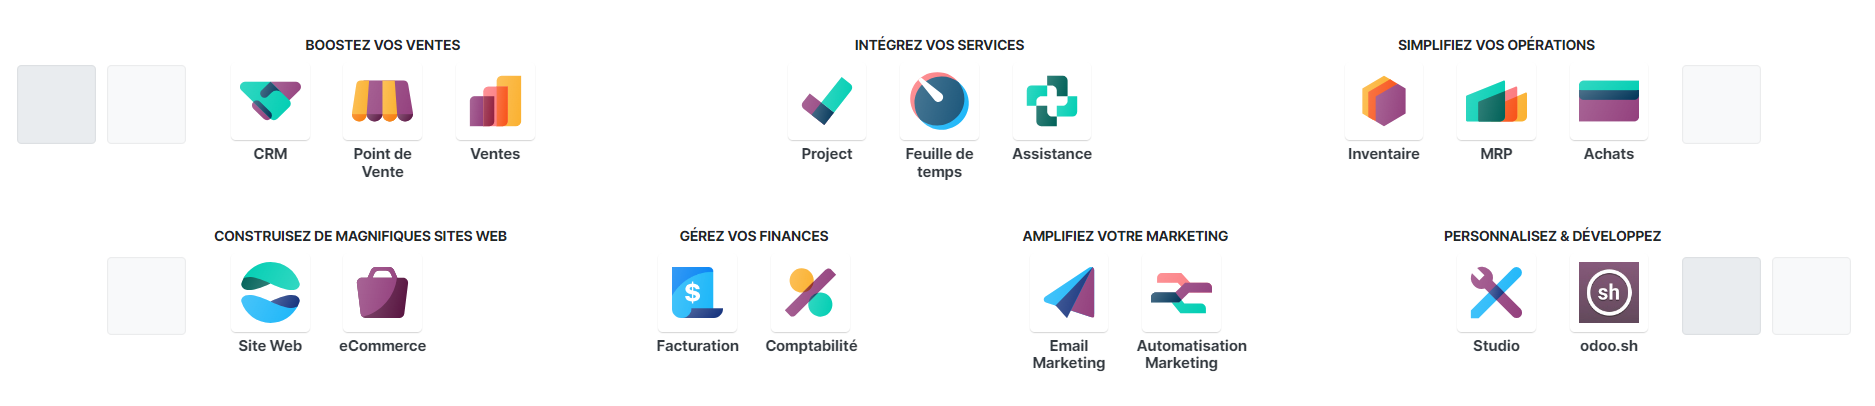 Une application odoo pour chaque besoin